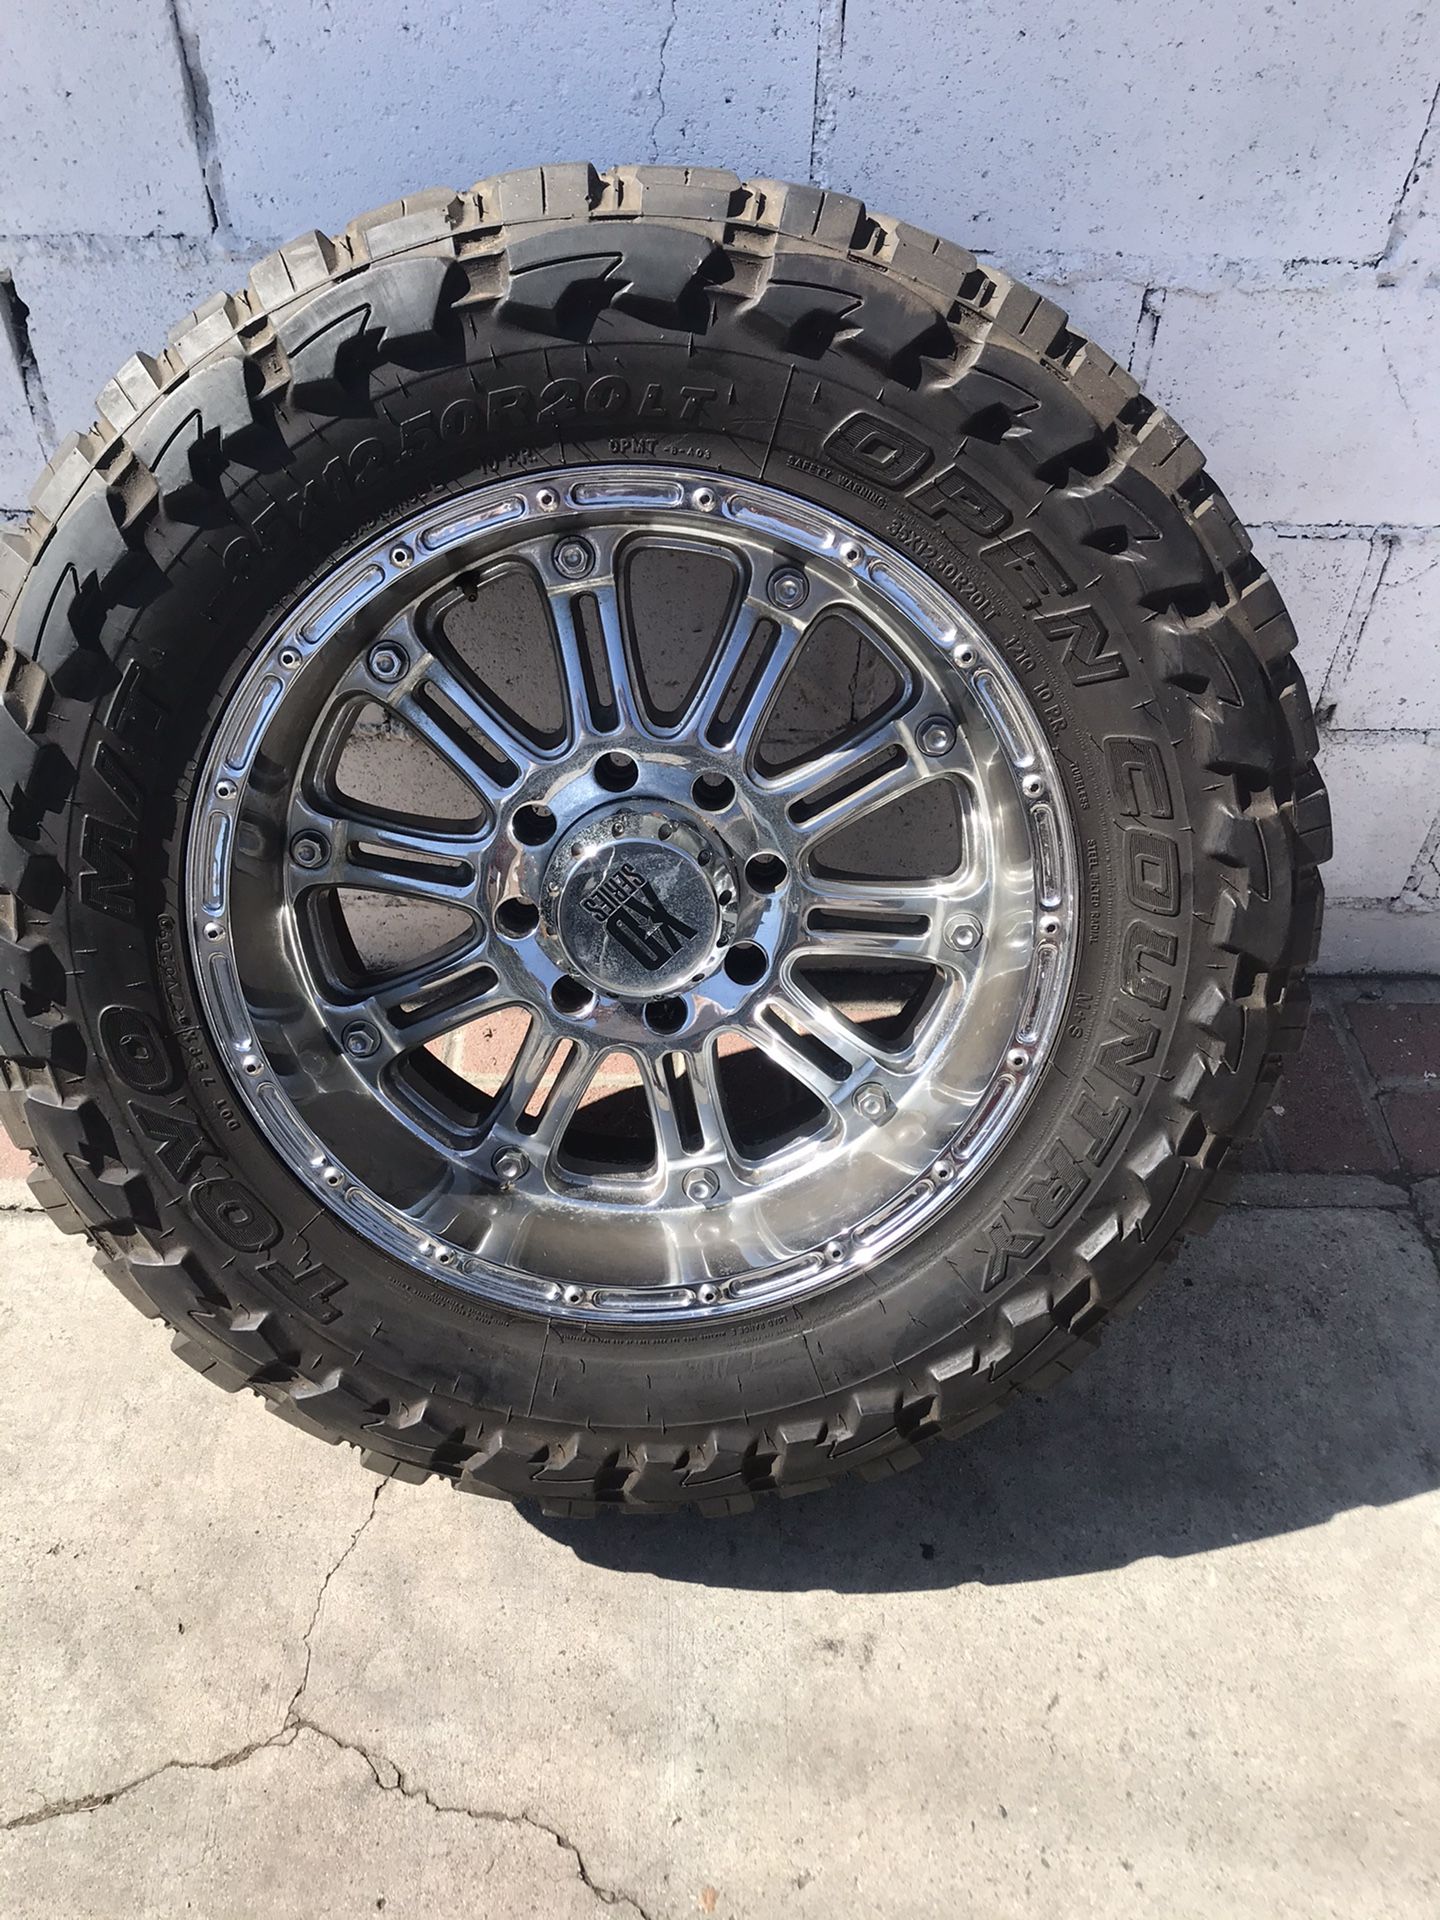 Off road wheels and tires